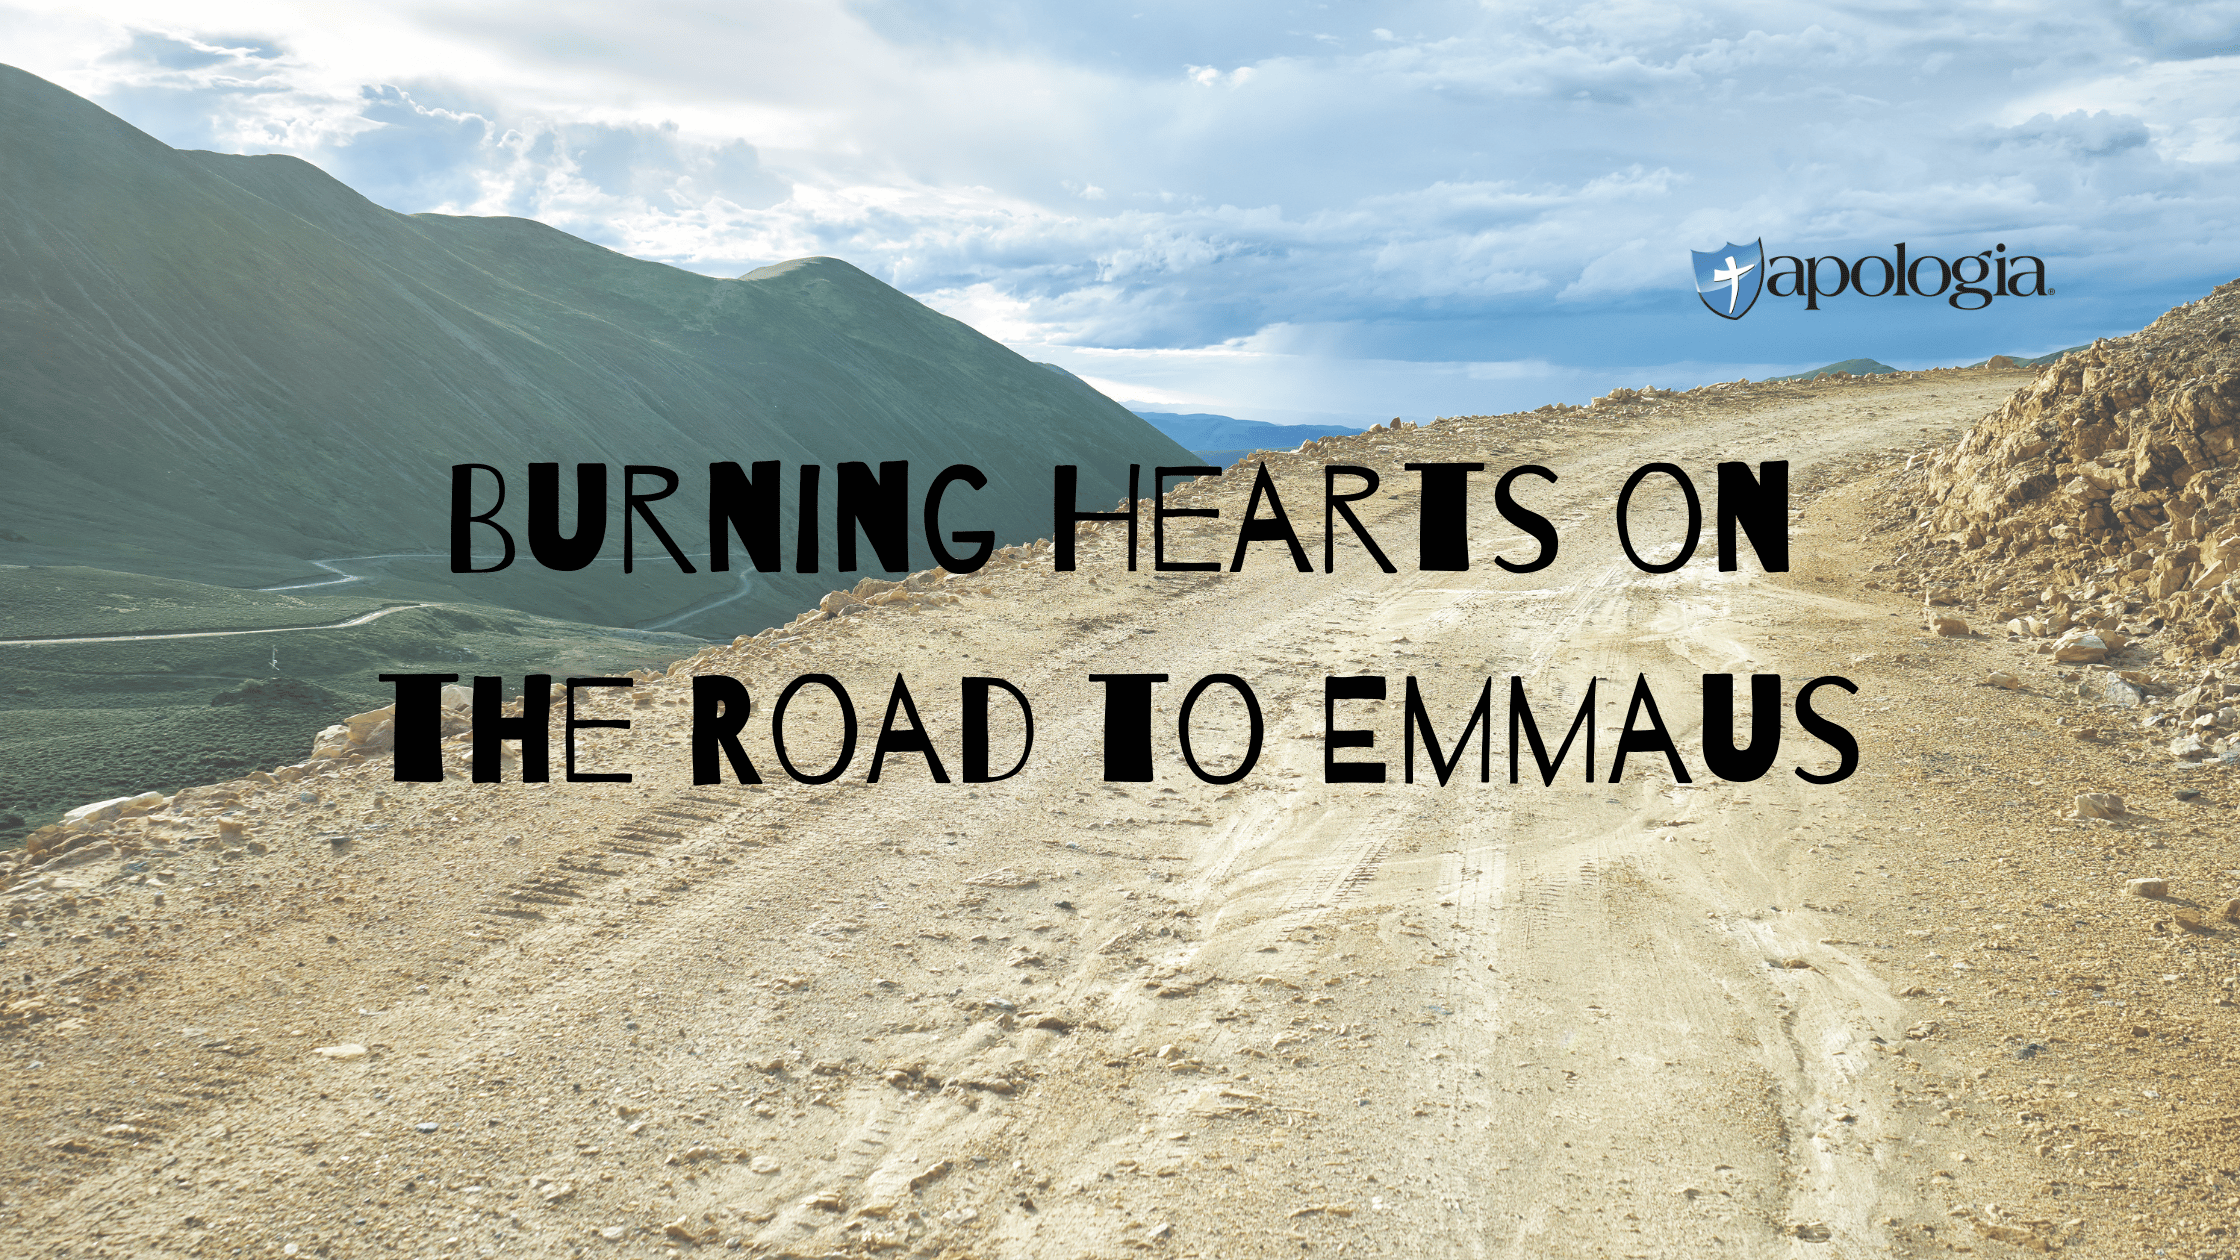 Burning Hearts on the Road to Emmaus